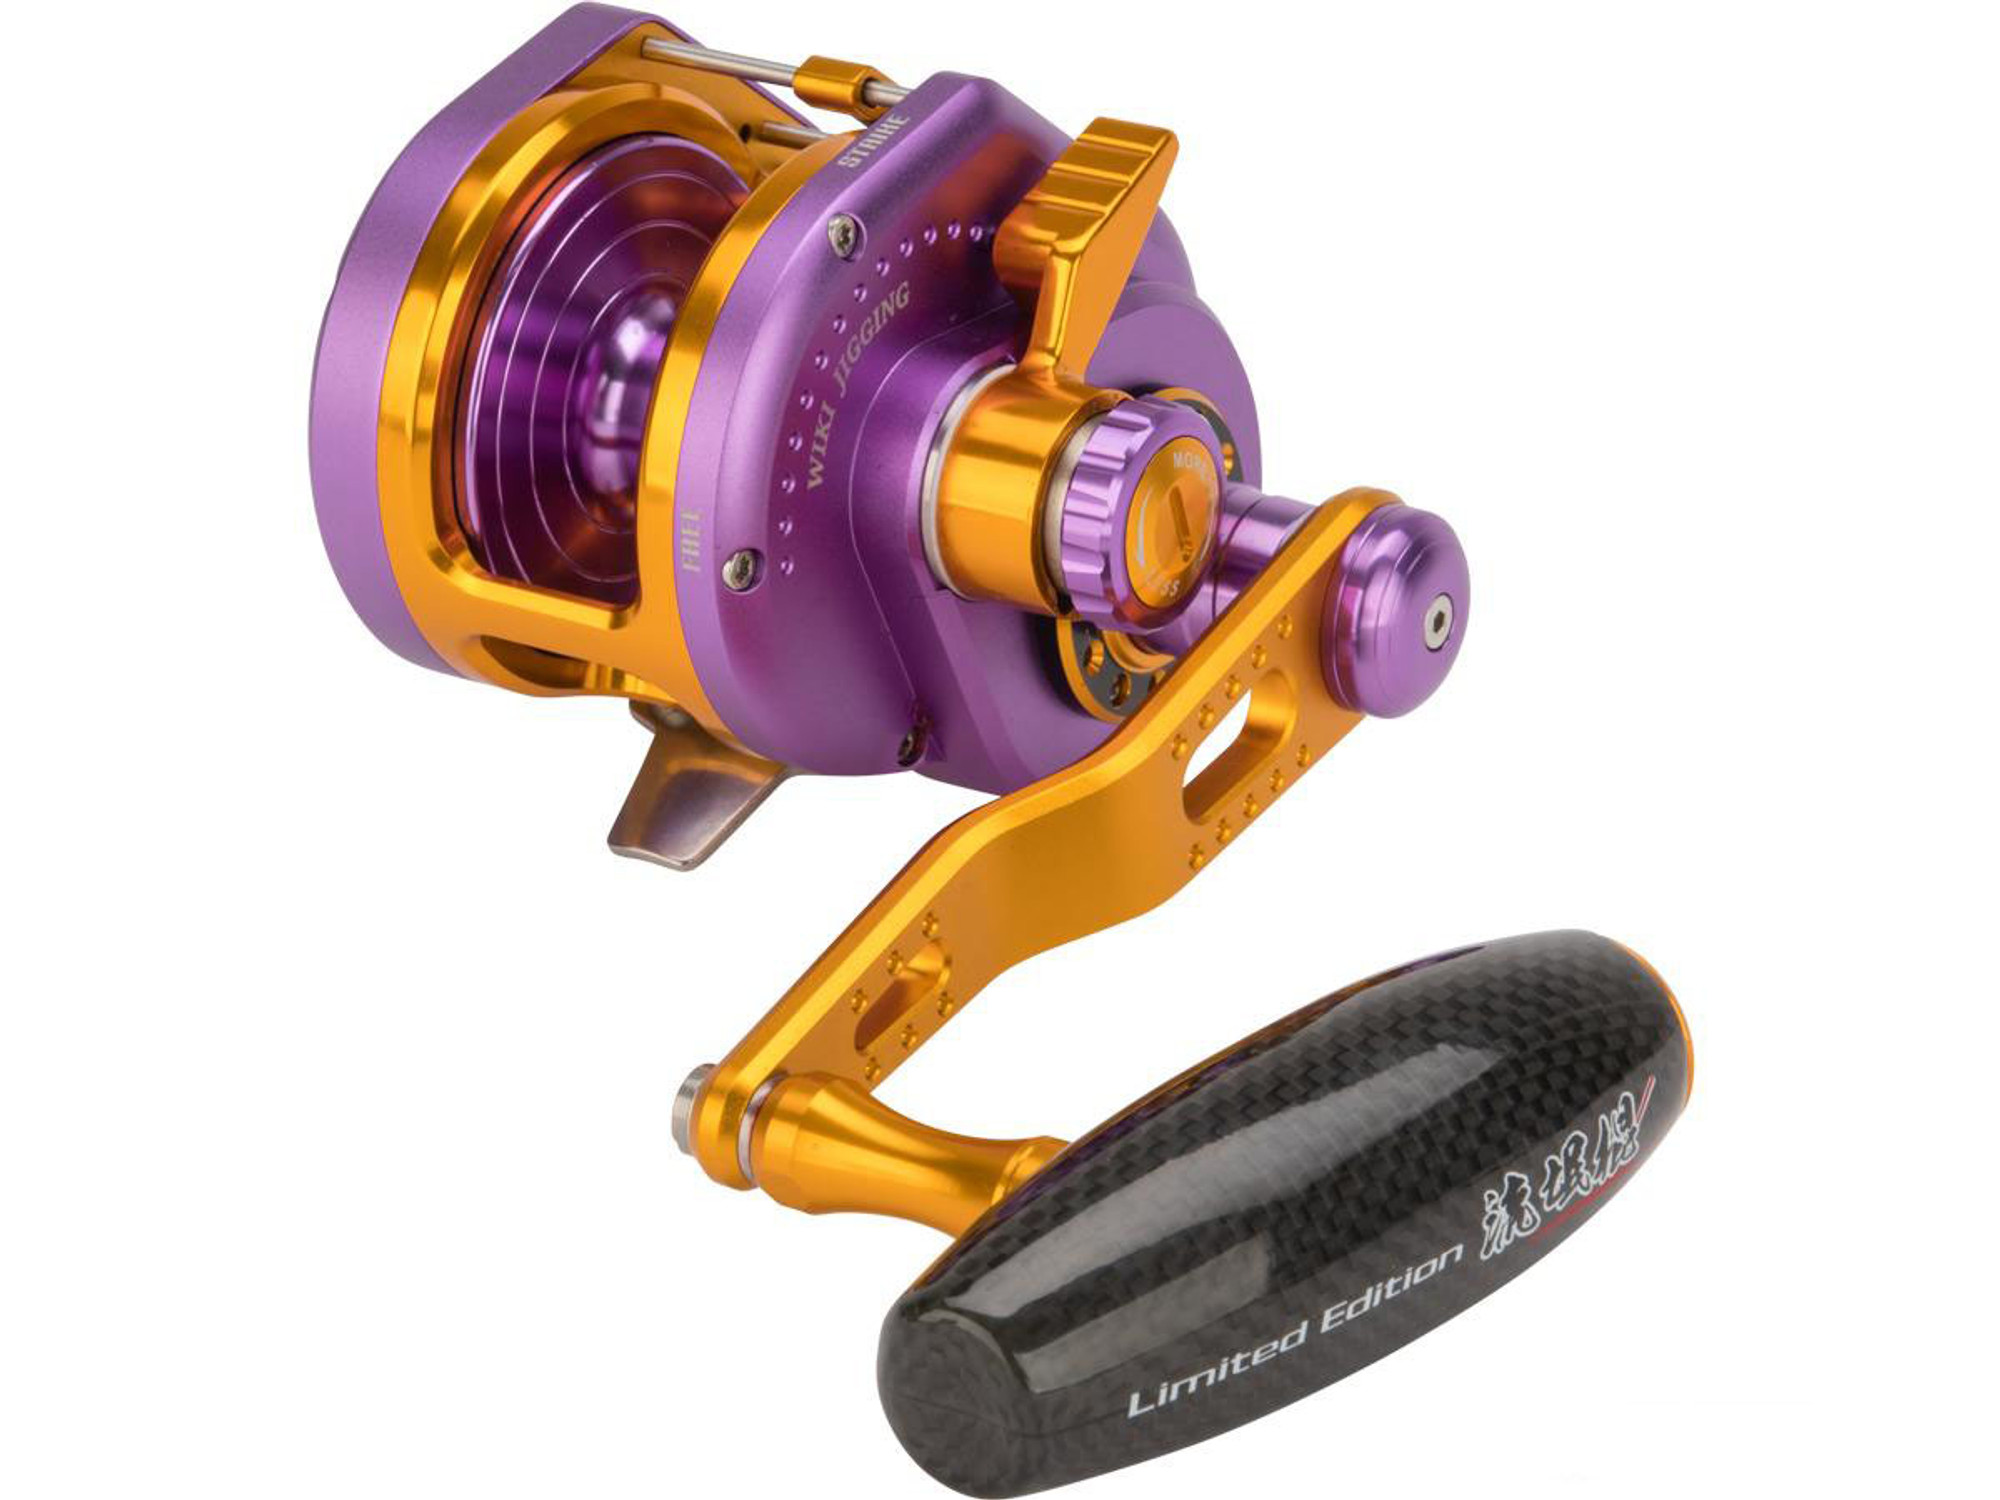 Jigging Master Gangster Limited Edition Wiki Lever Wind Fishing Reel w/ Automatic Line Guide (Model: 2000XH Right Purple/Gold)